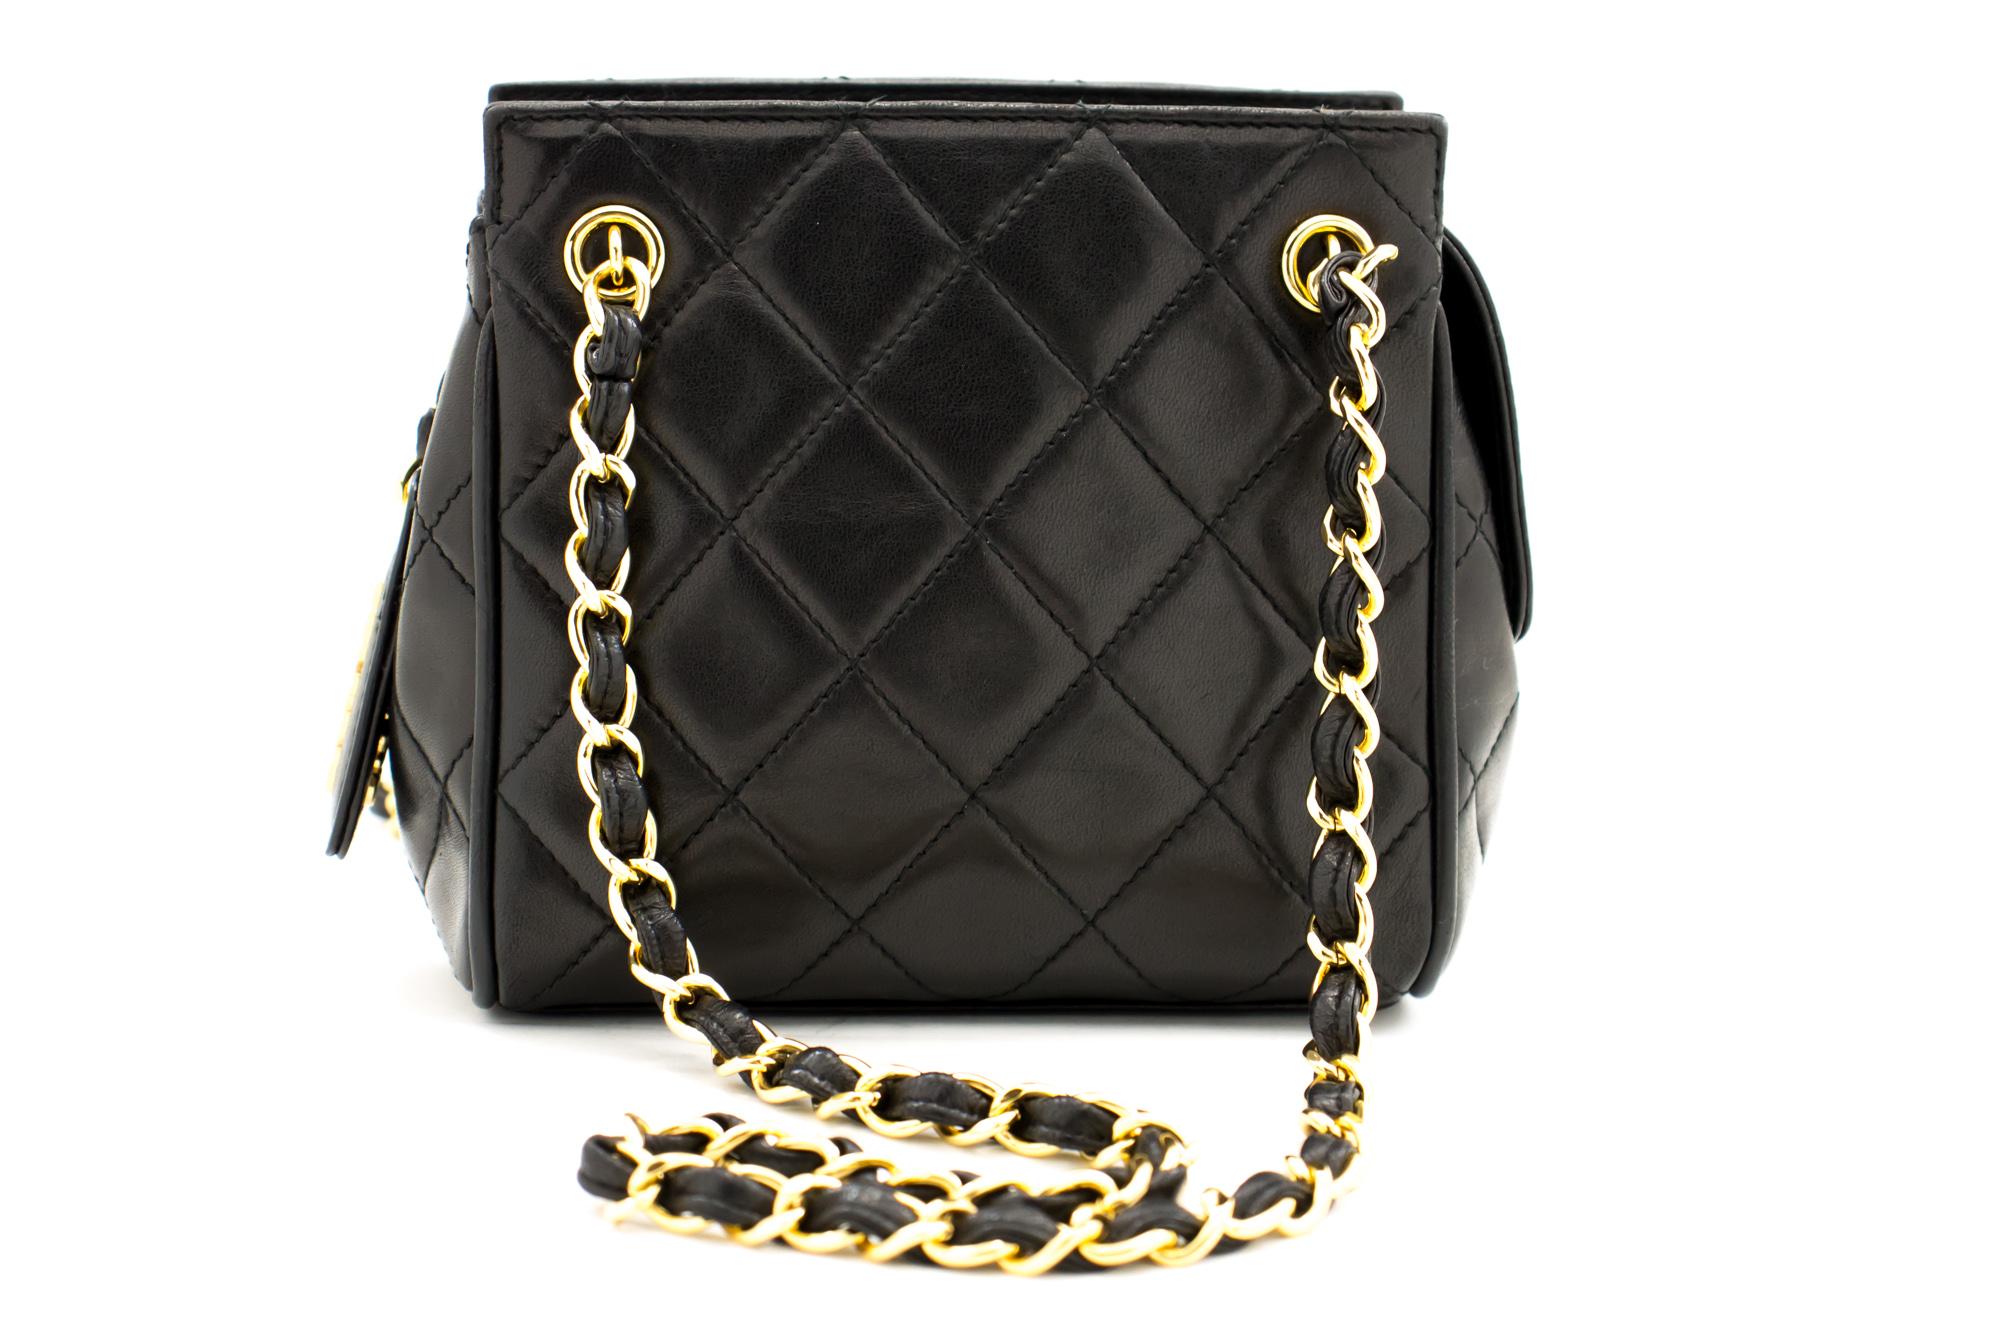 An authentic CHANEL Mini Small Double Chain Shoulder Bag Black Quilted made of black Lambskin. The color is Black. The outside material is Leather. The pattern is Solid. This item is Vintage / Classic. The year of manufacture would be